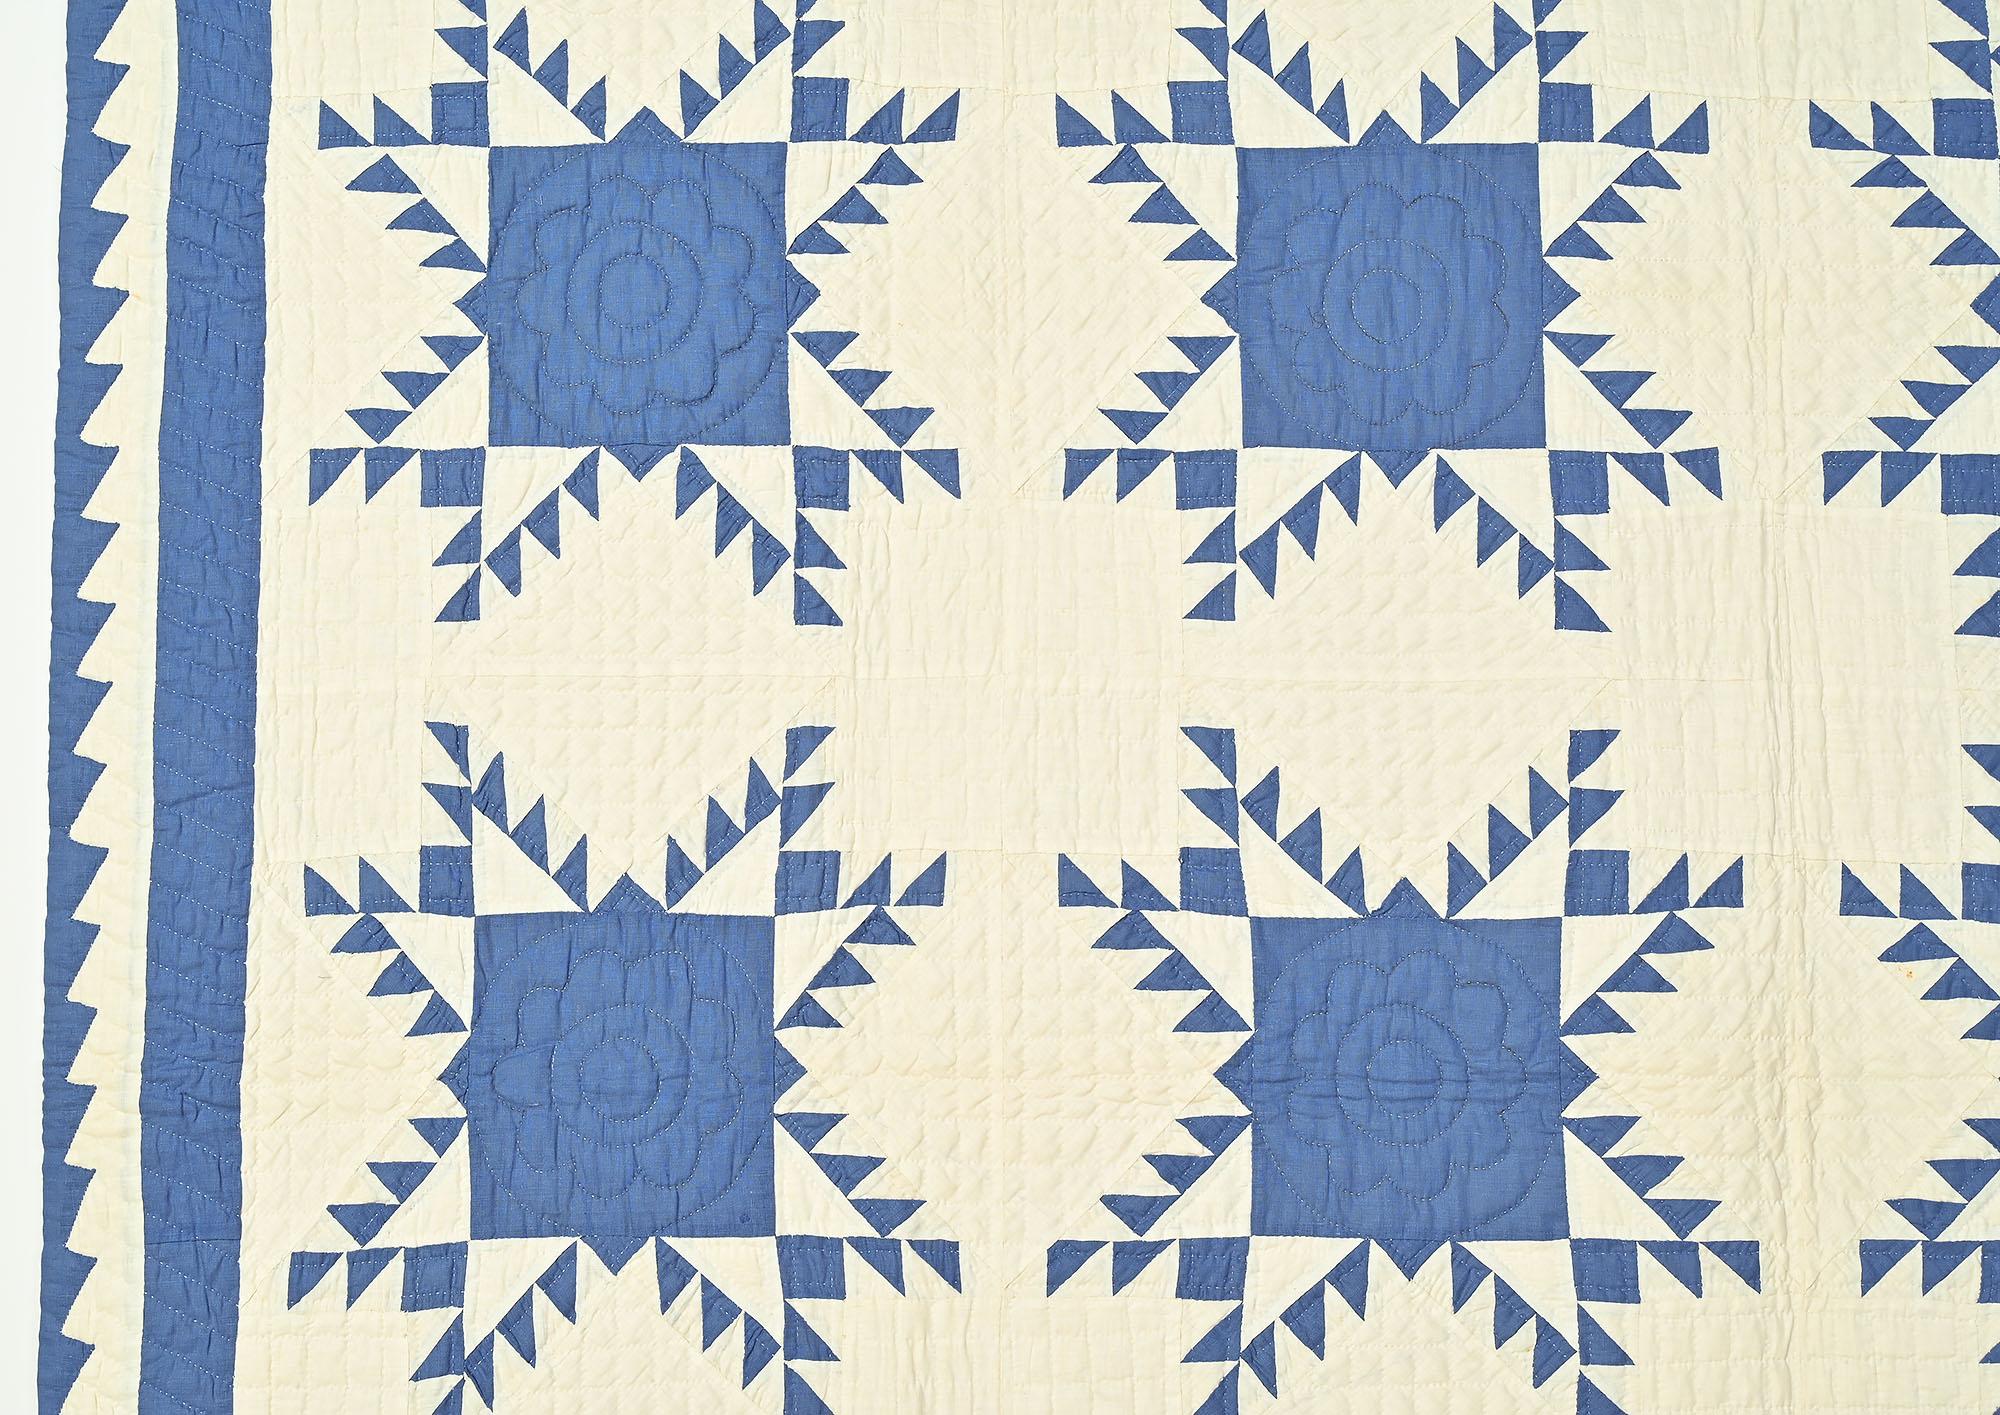 American Feathered Stars Quilt